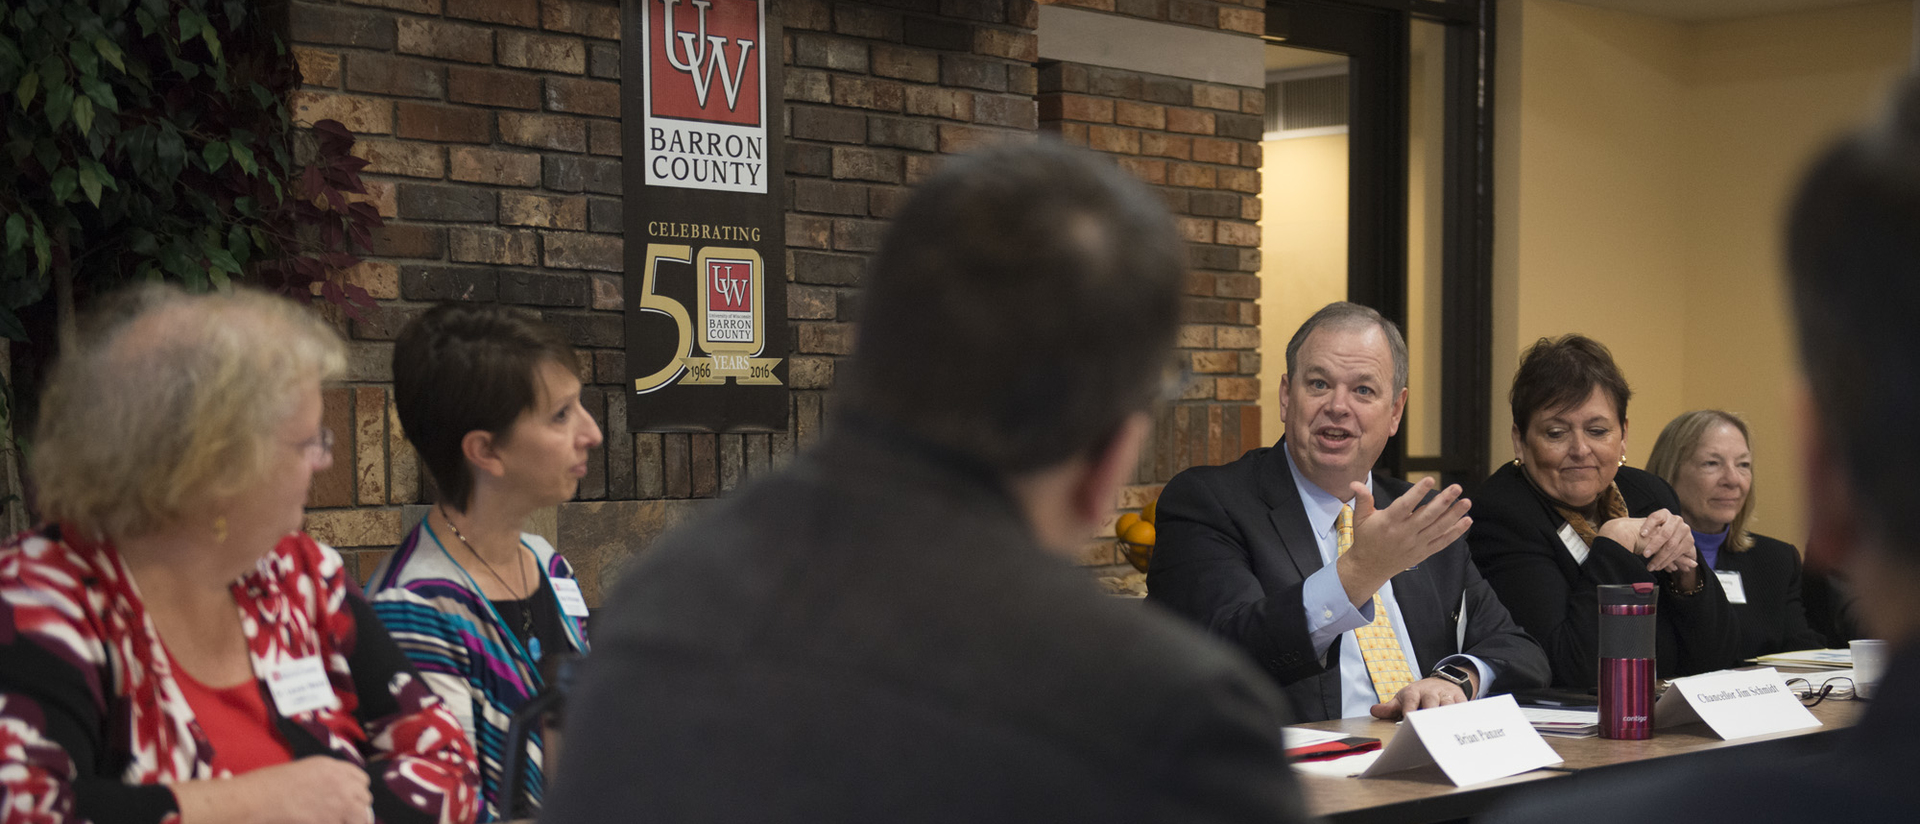 Chancellor during visit to UW-Barron County